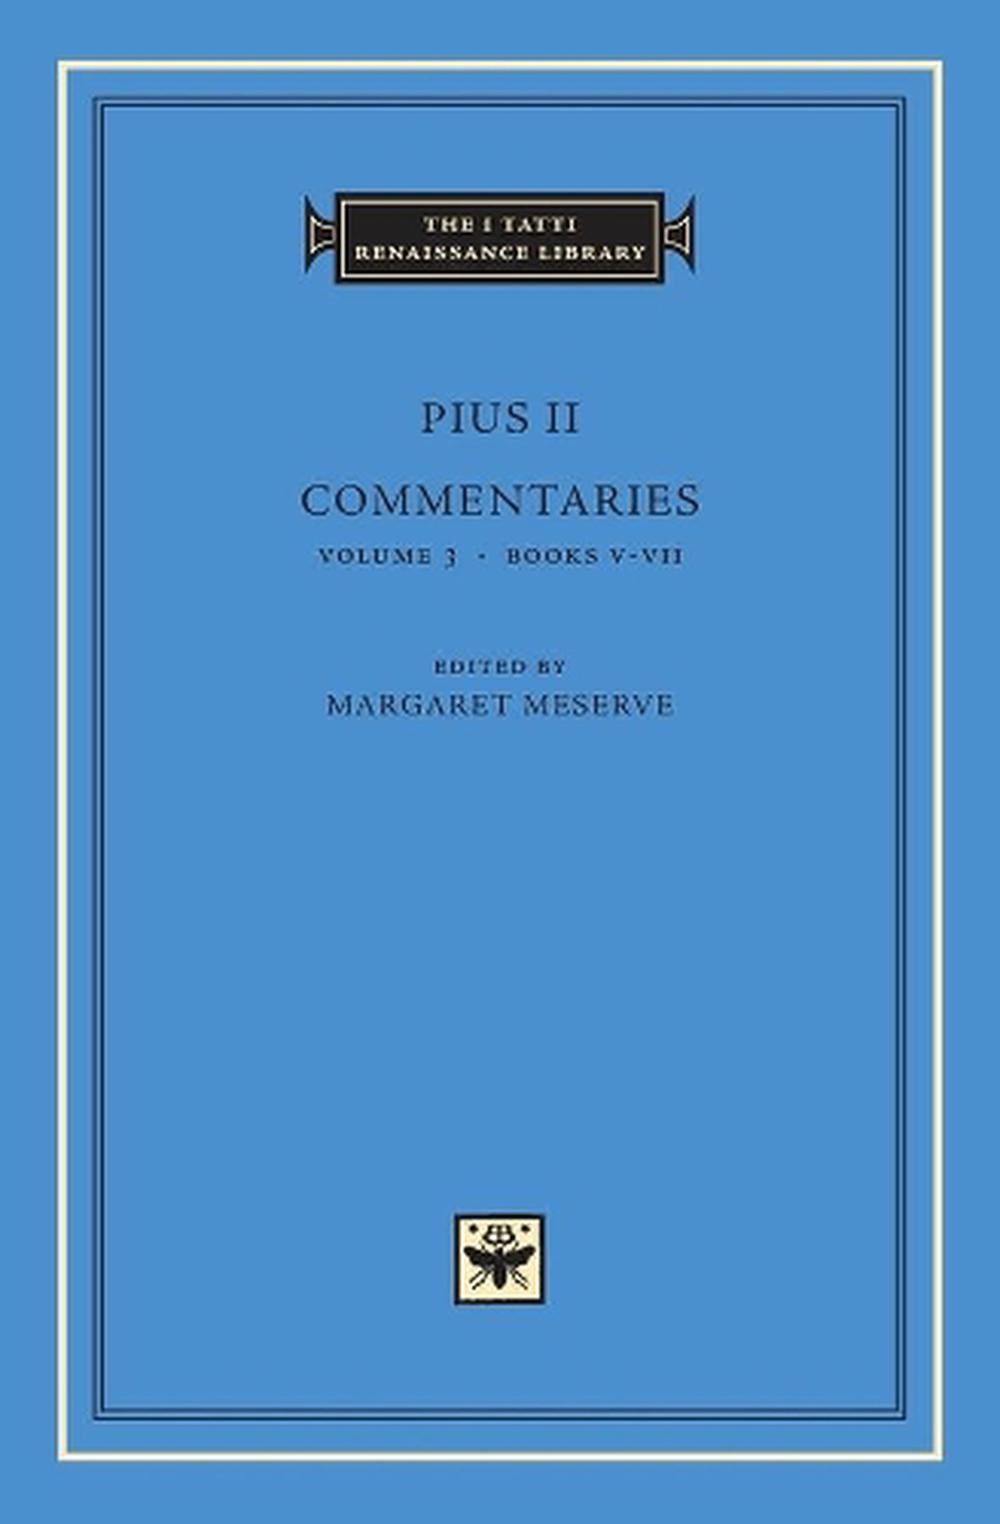 Commentaries, Volume 3 Books VVII by Pius II (English) Hardcover Book